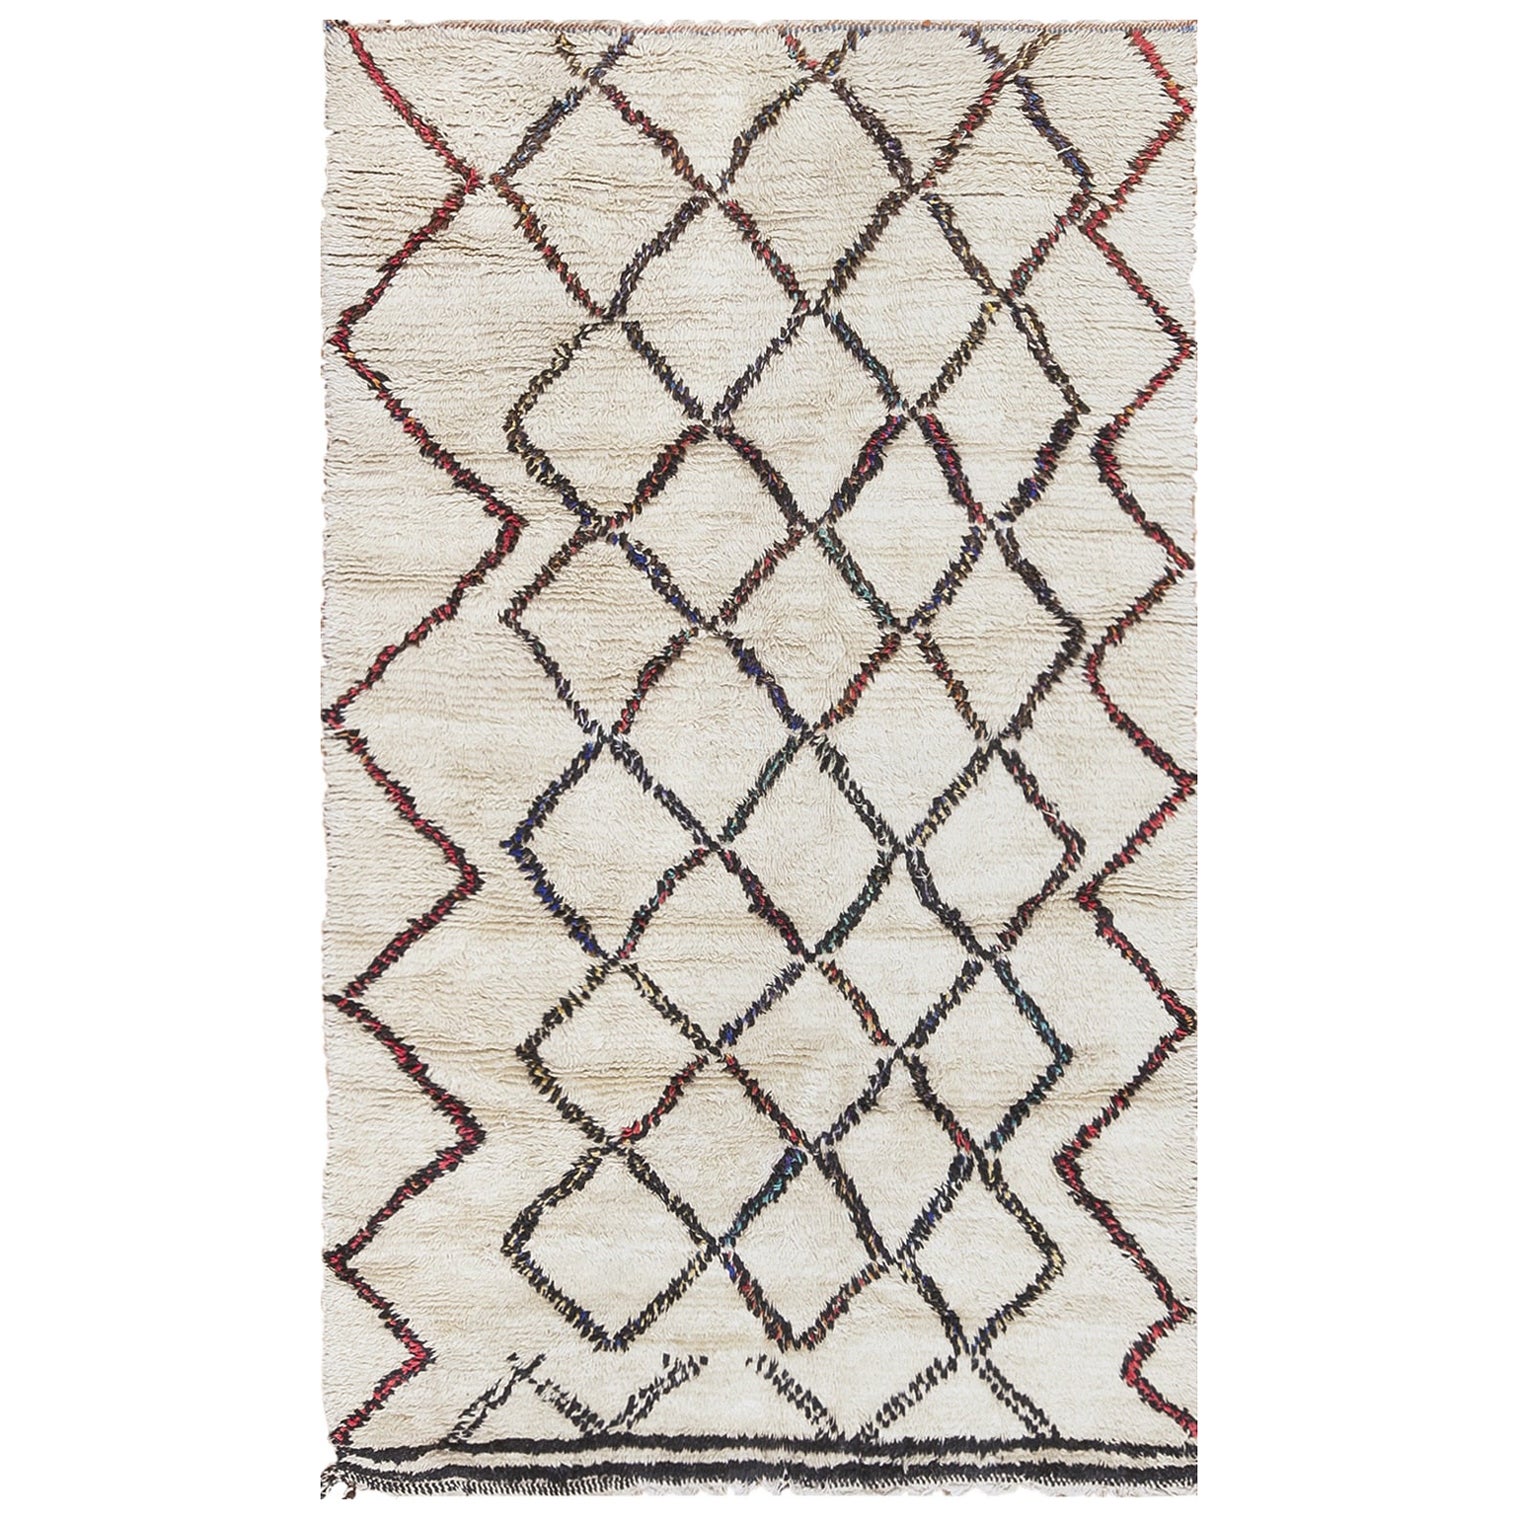 Vintage Ivory Beni Ourain Moroccan Rug. Size: 4 ft 8 in x 7 ft 8 in For Sale